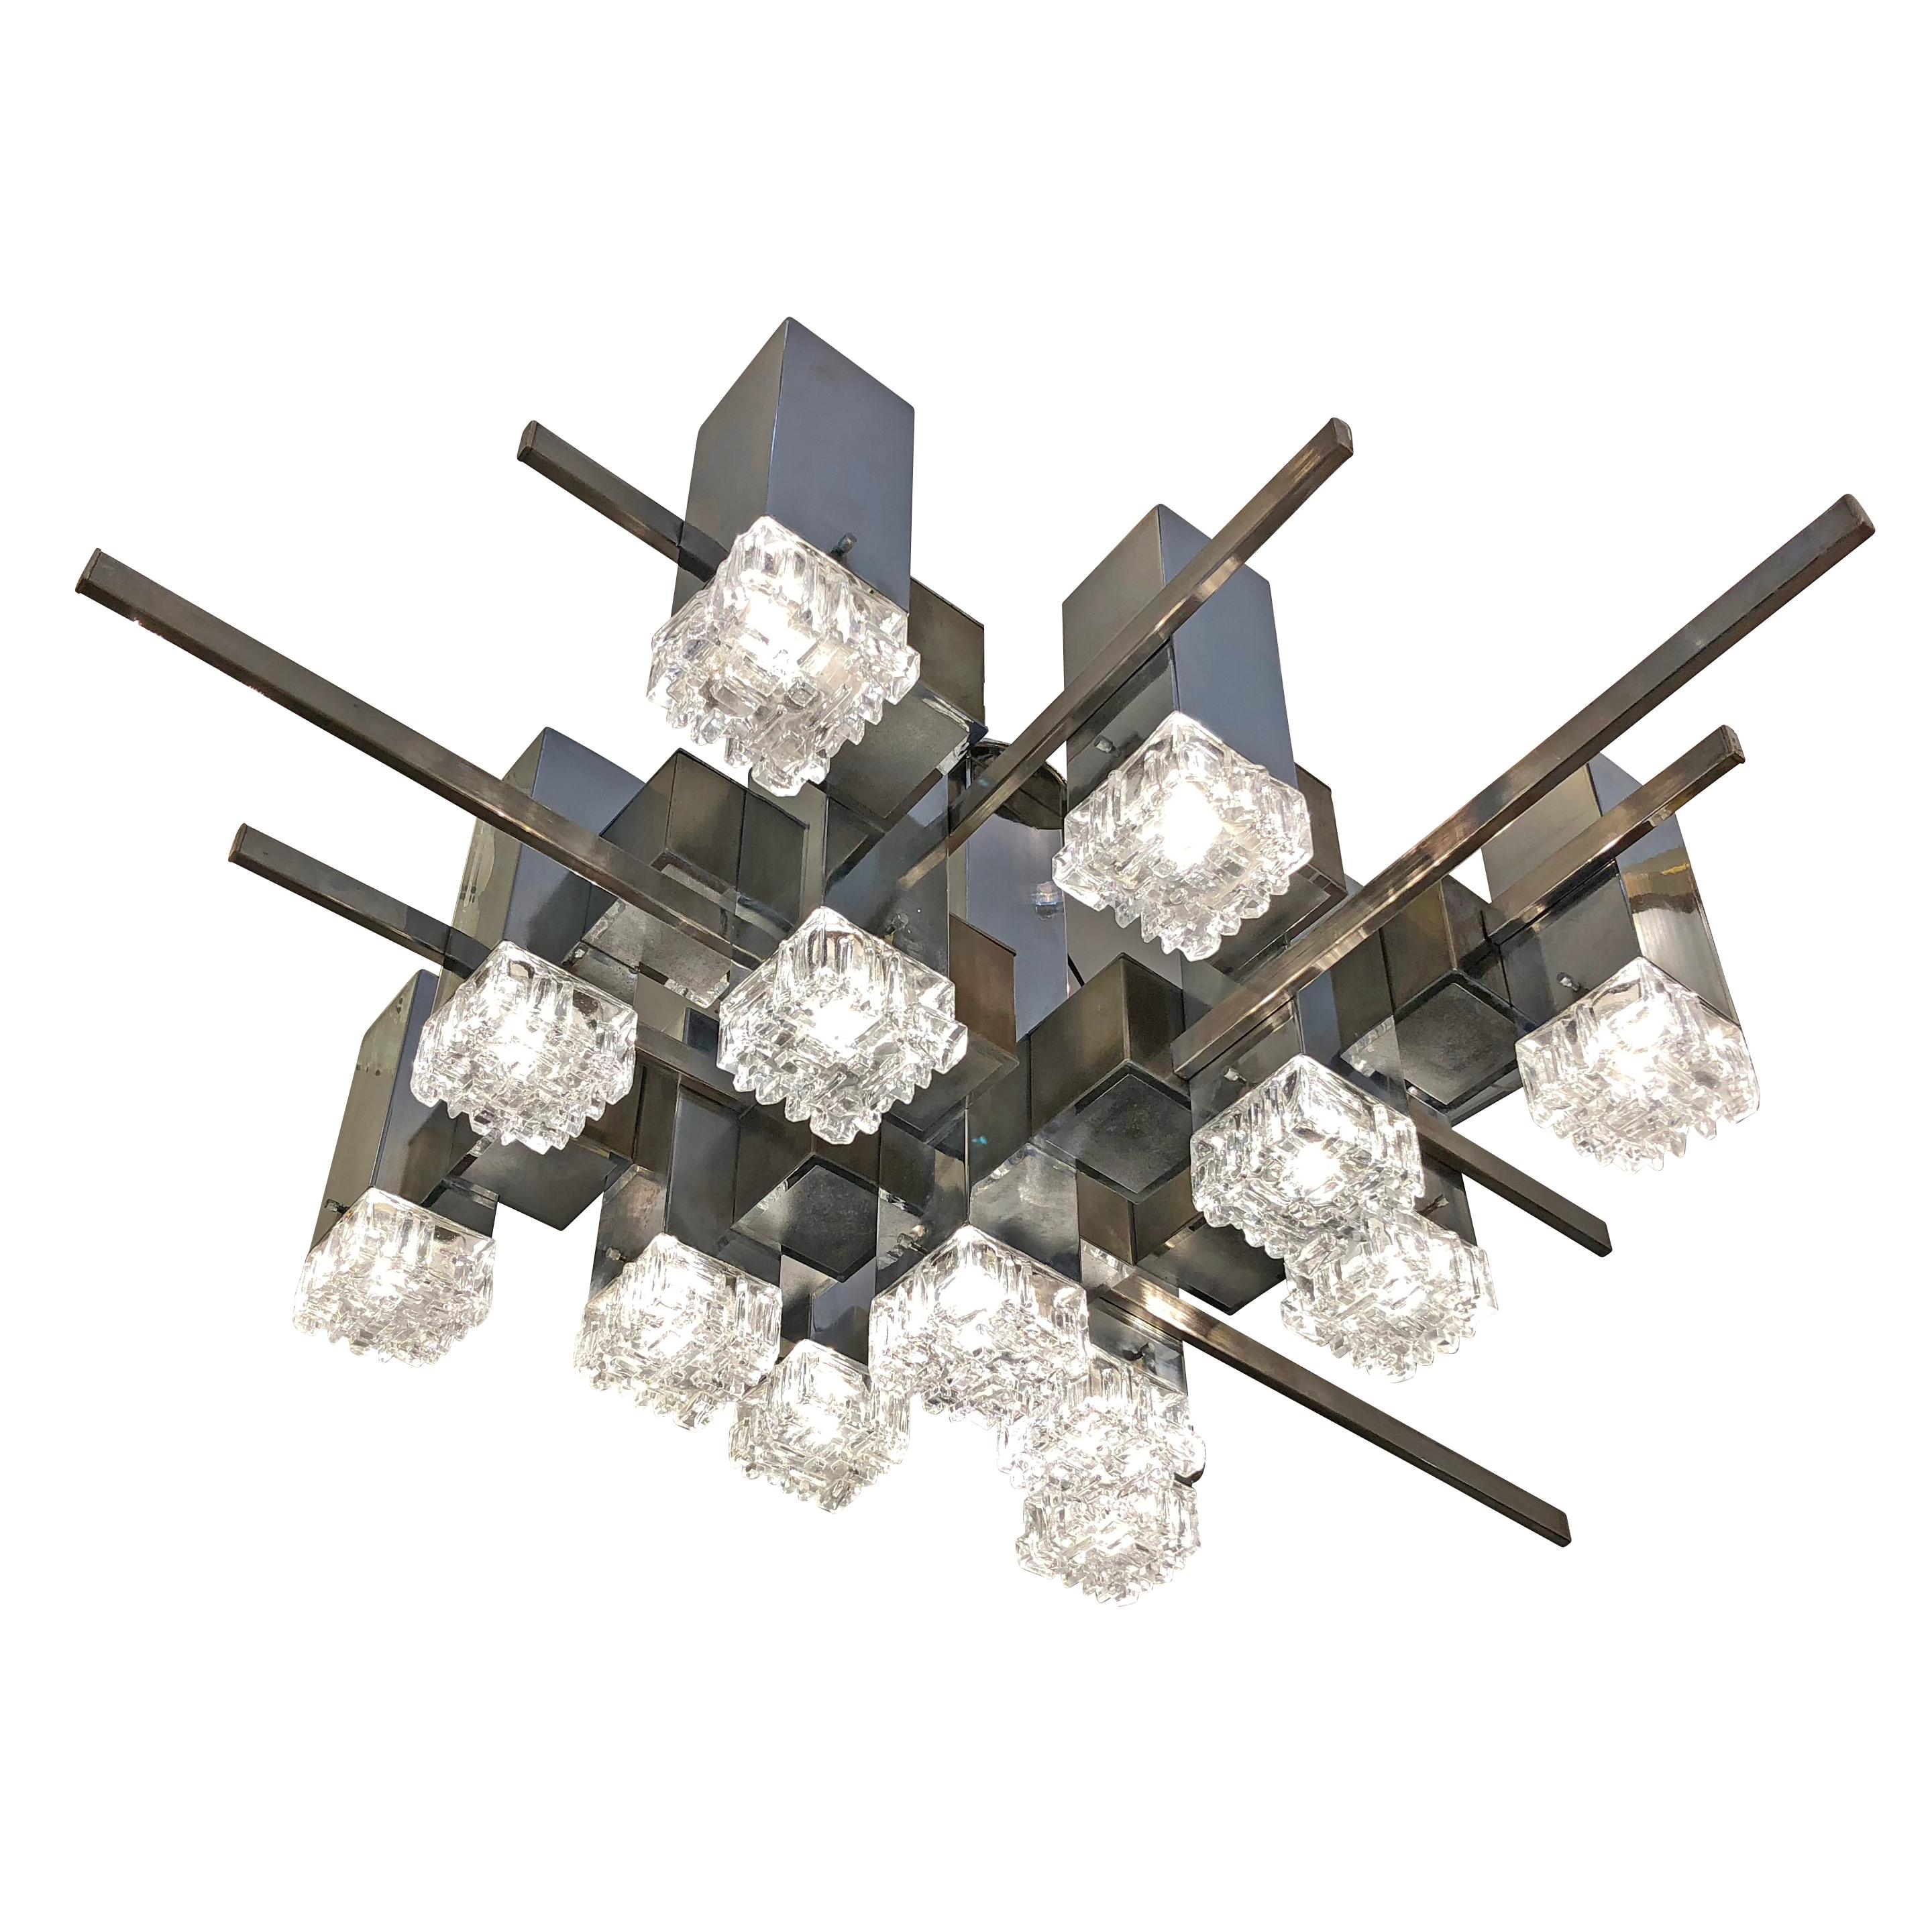 Large chandelier designed by Gaetano Sciolari in the 1960s featuring an “abstract” frame with nickel, brass and plastic components and textured glass shades. Holds 13 candelabra sockets. Height can be adjusted as needed by adding a